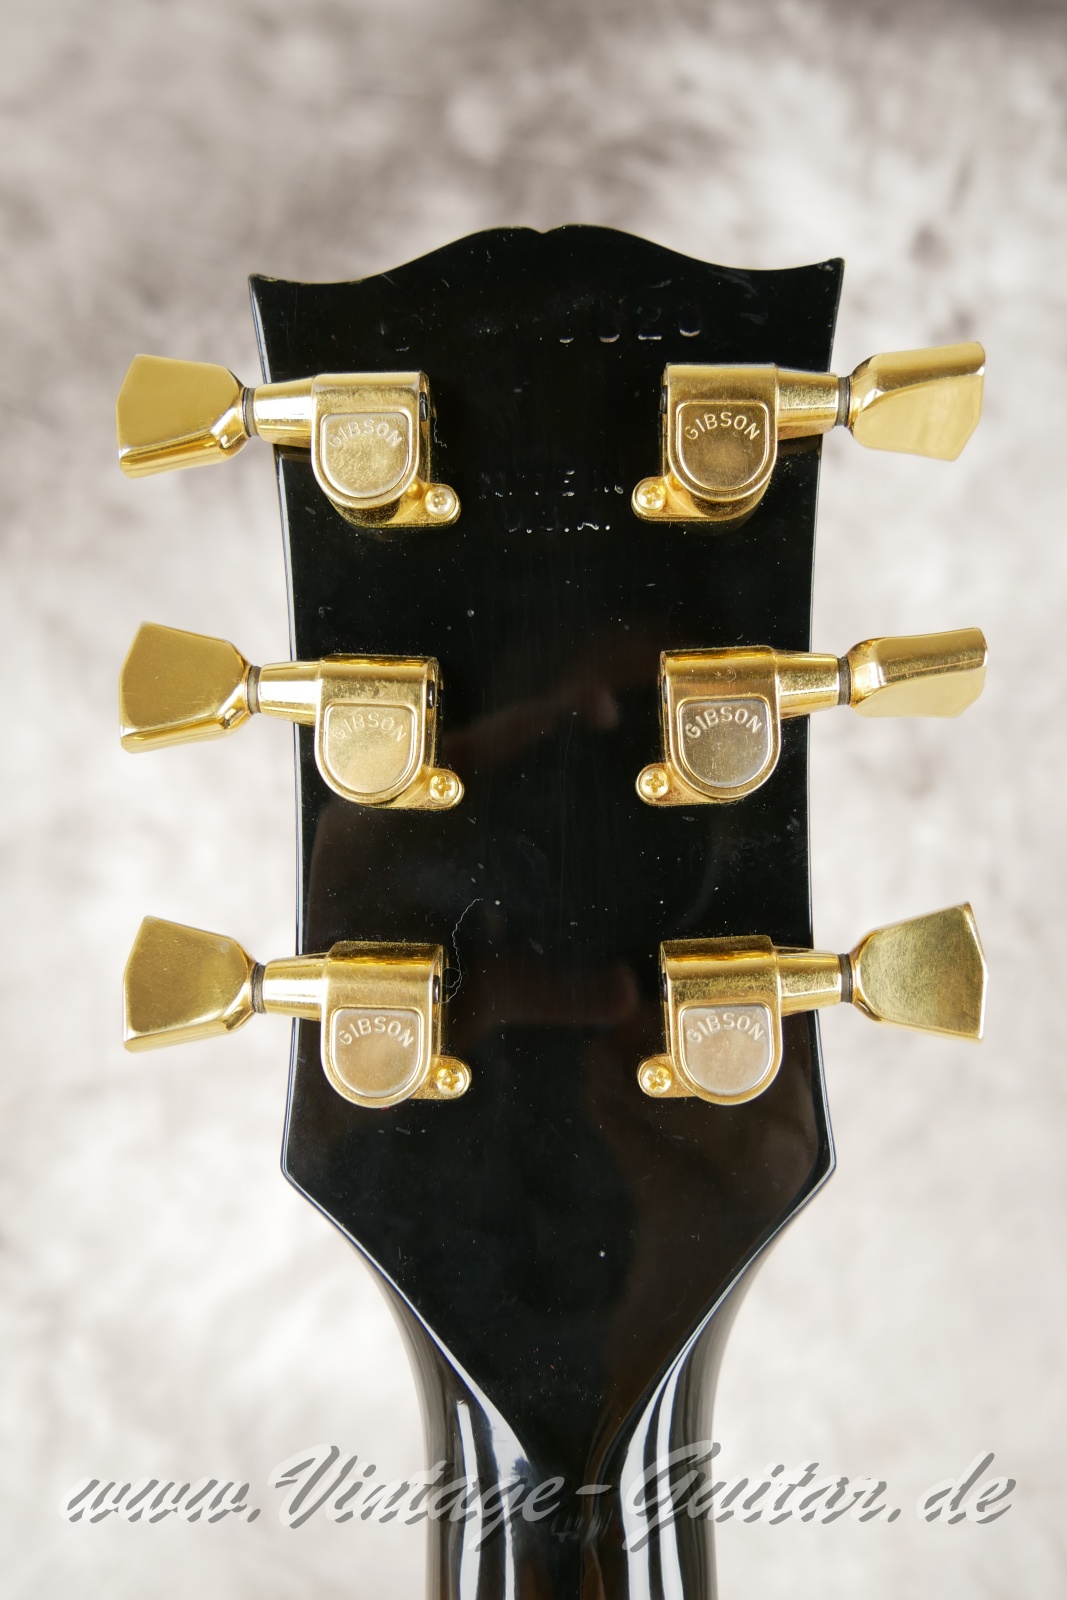 Gibson-L5-Wes-Montgomery-1993-Master-Model-James-Hutchins-010.JPG